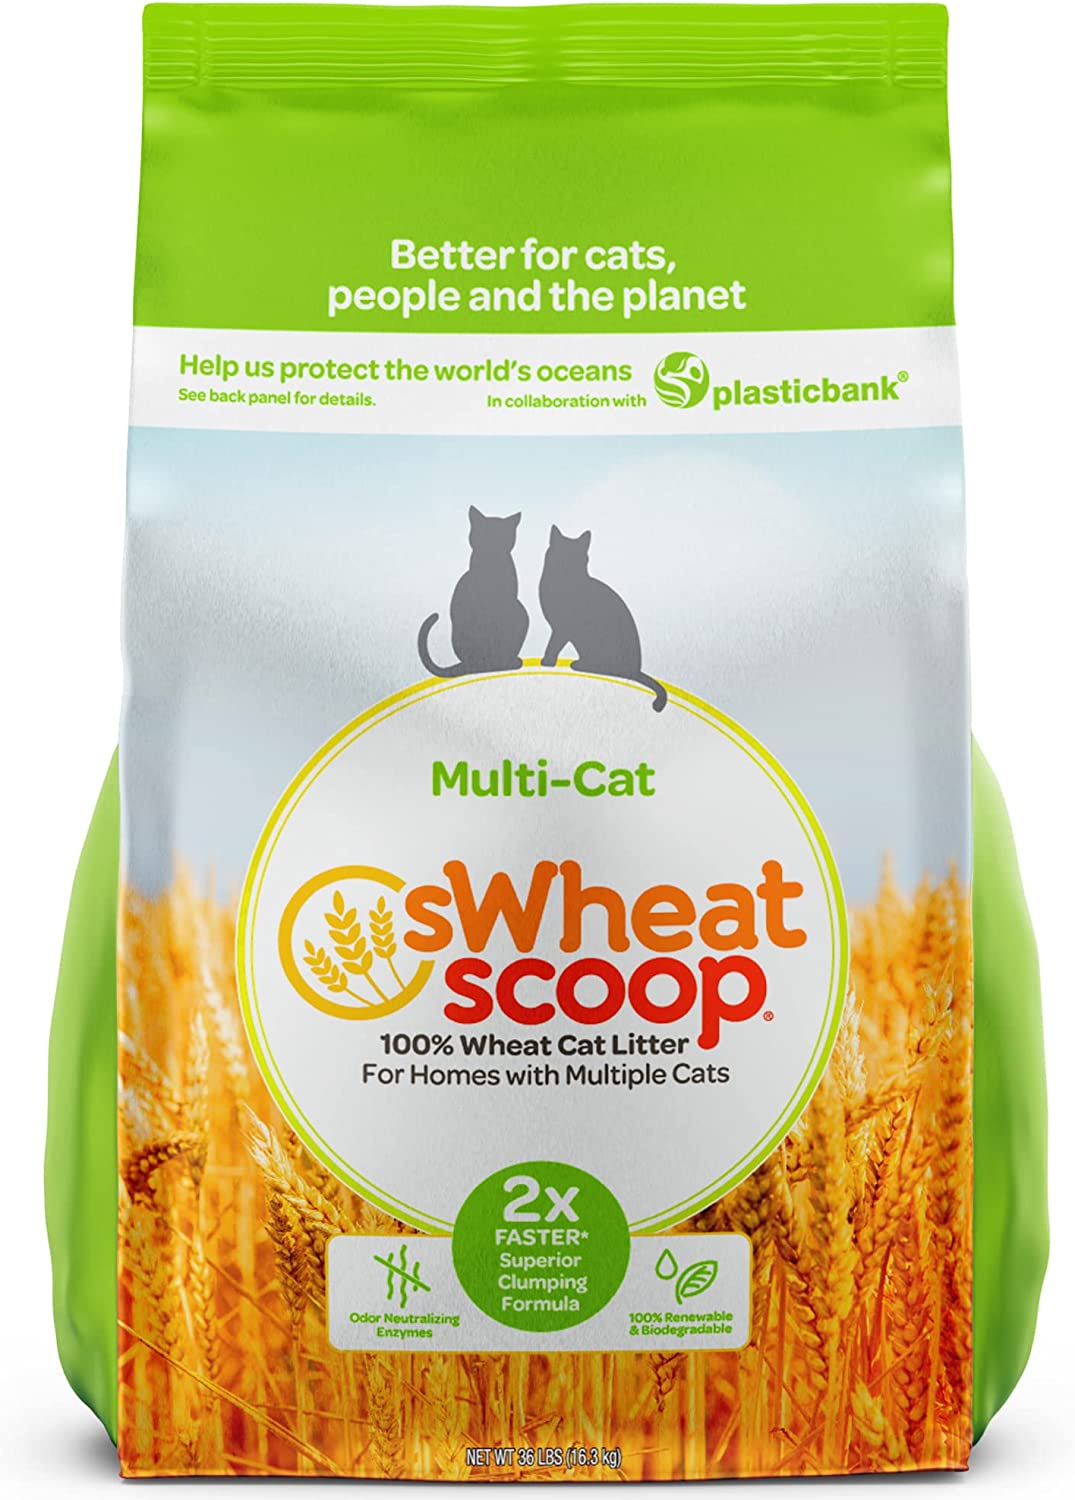 7. sWheat Scoop Wheat-Based Natural Cat Litter